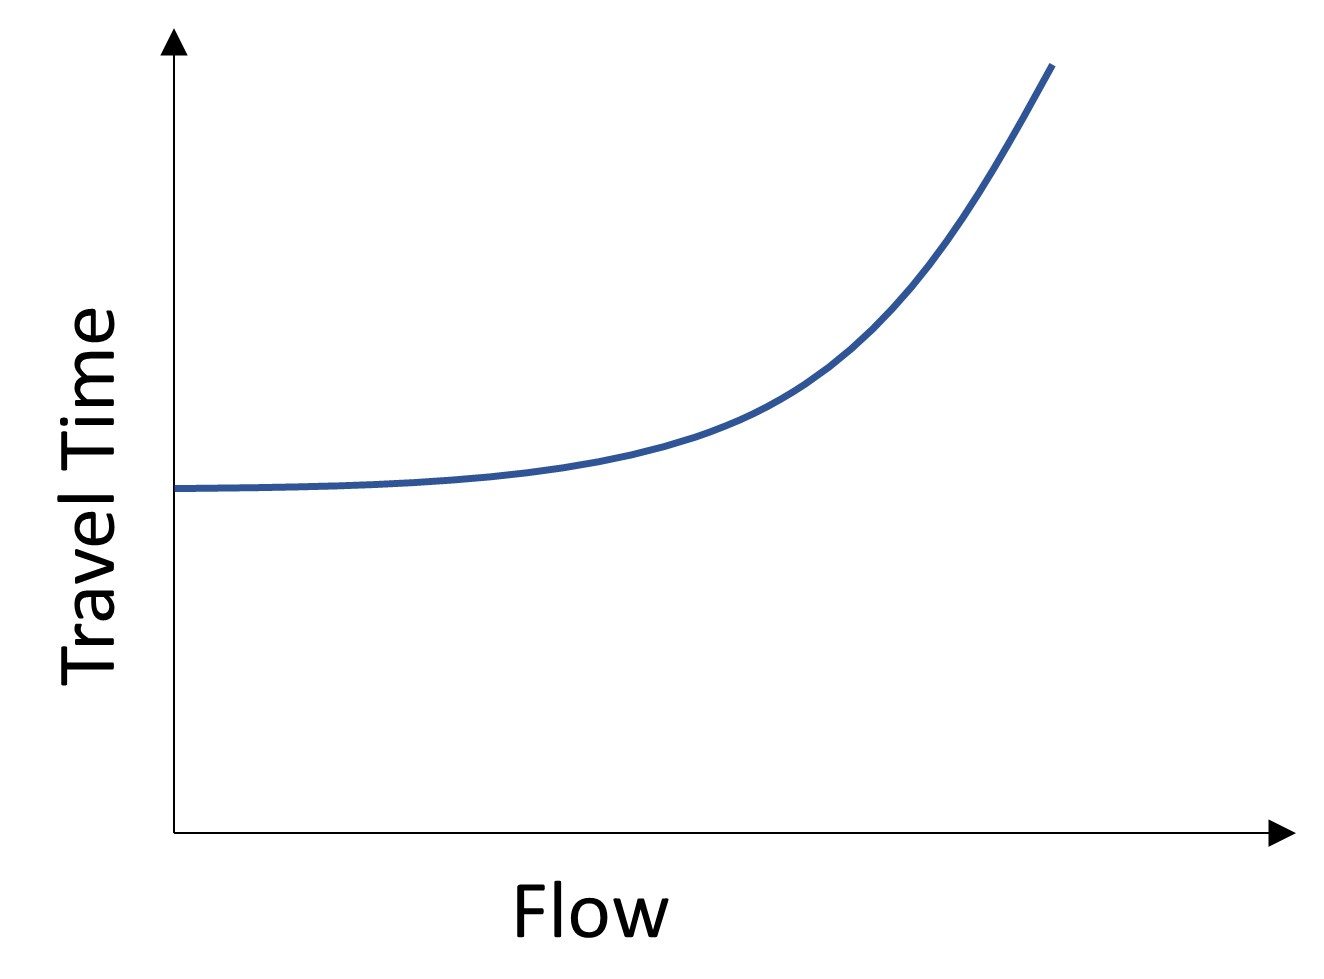 This figure shows the exponential relationship between travel time and flow of traffic,